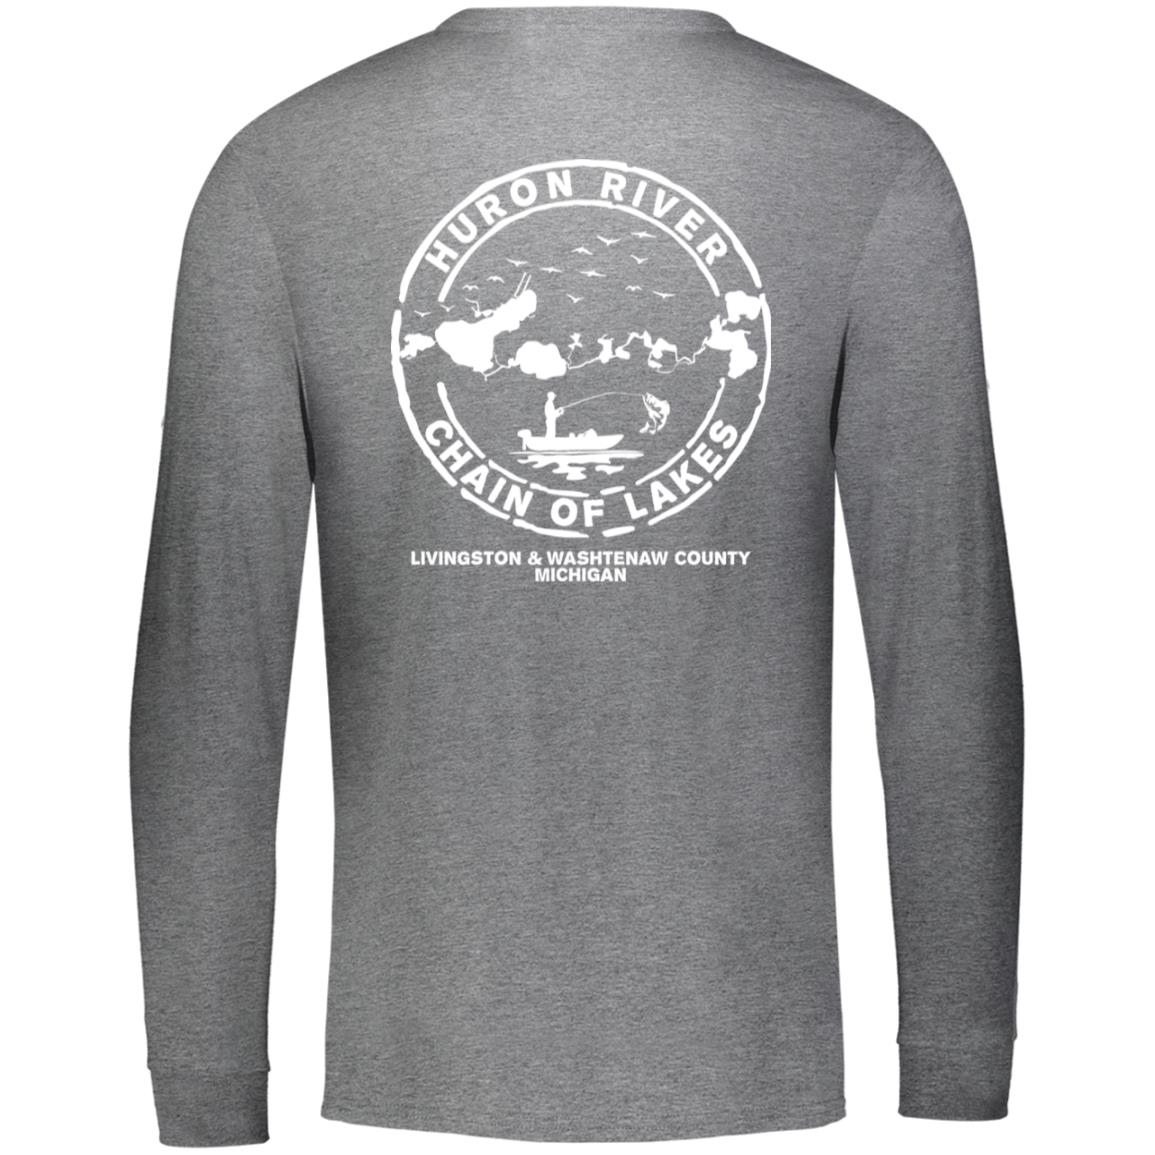 HRCL FL - More Fun To Put In Than Pull Out - 2 Sided 64LTTM Essential Dri-Power Long Sleeve Tee